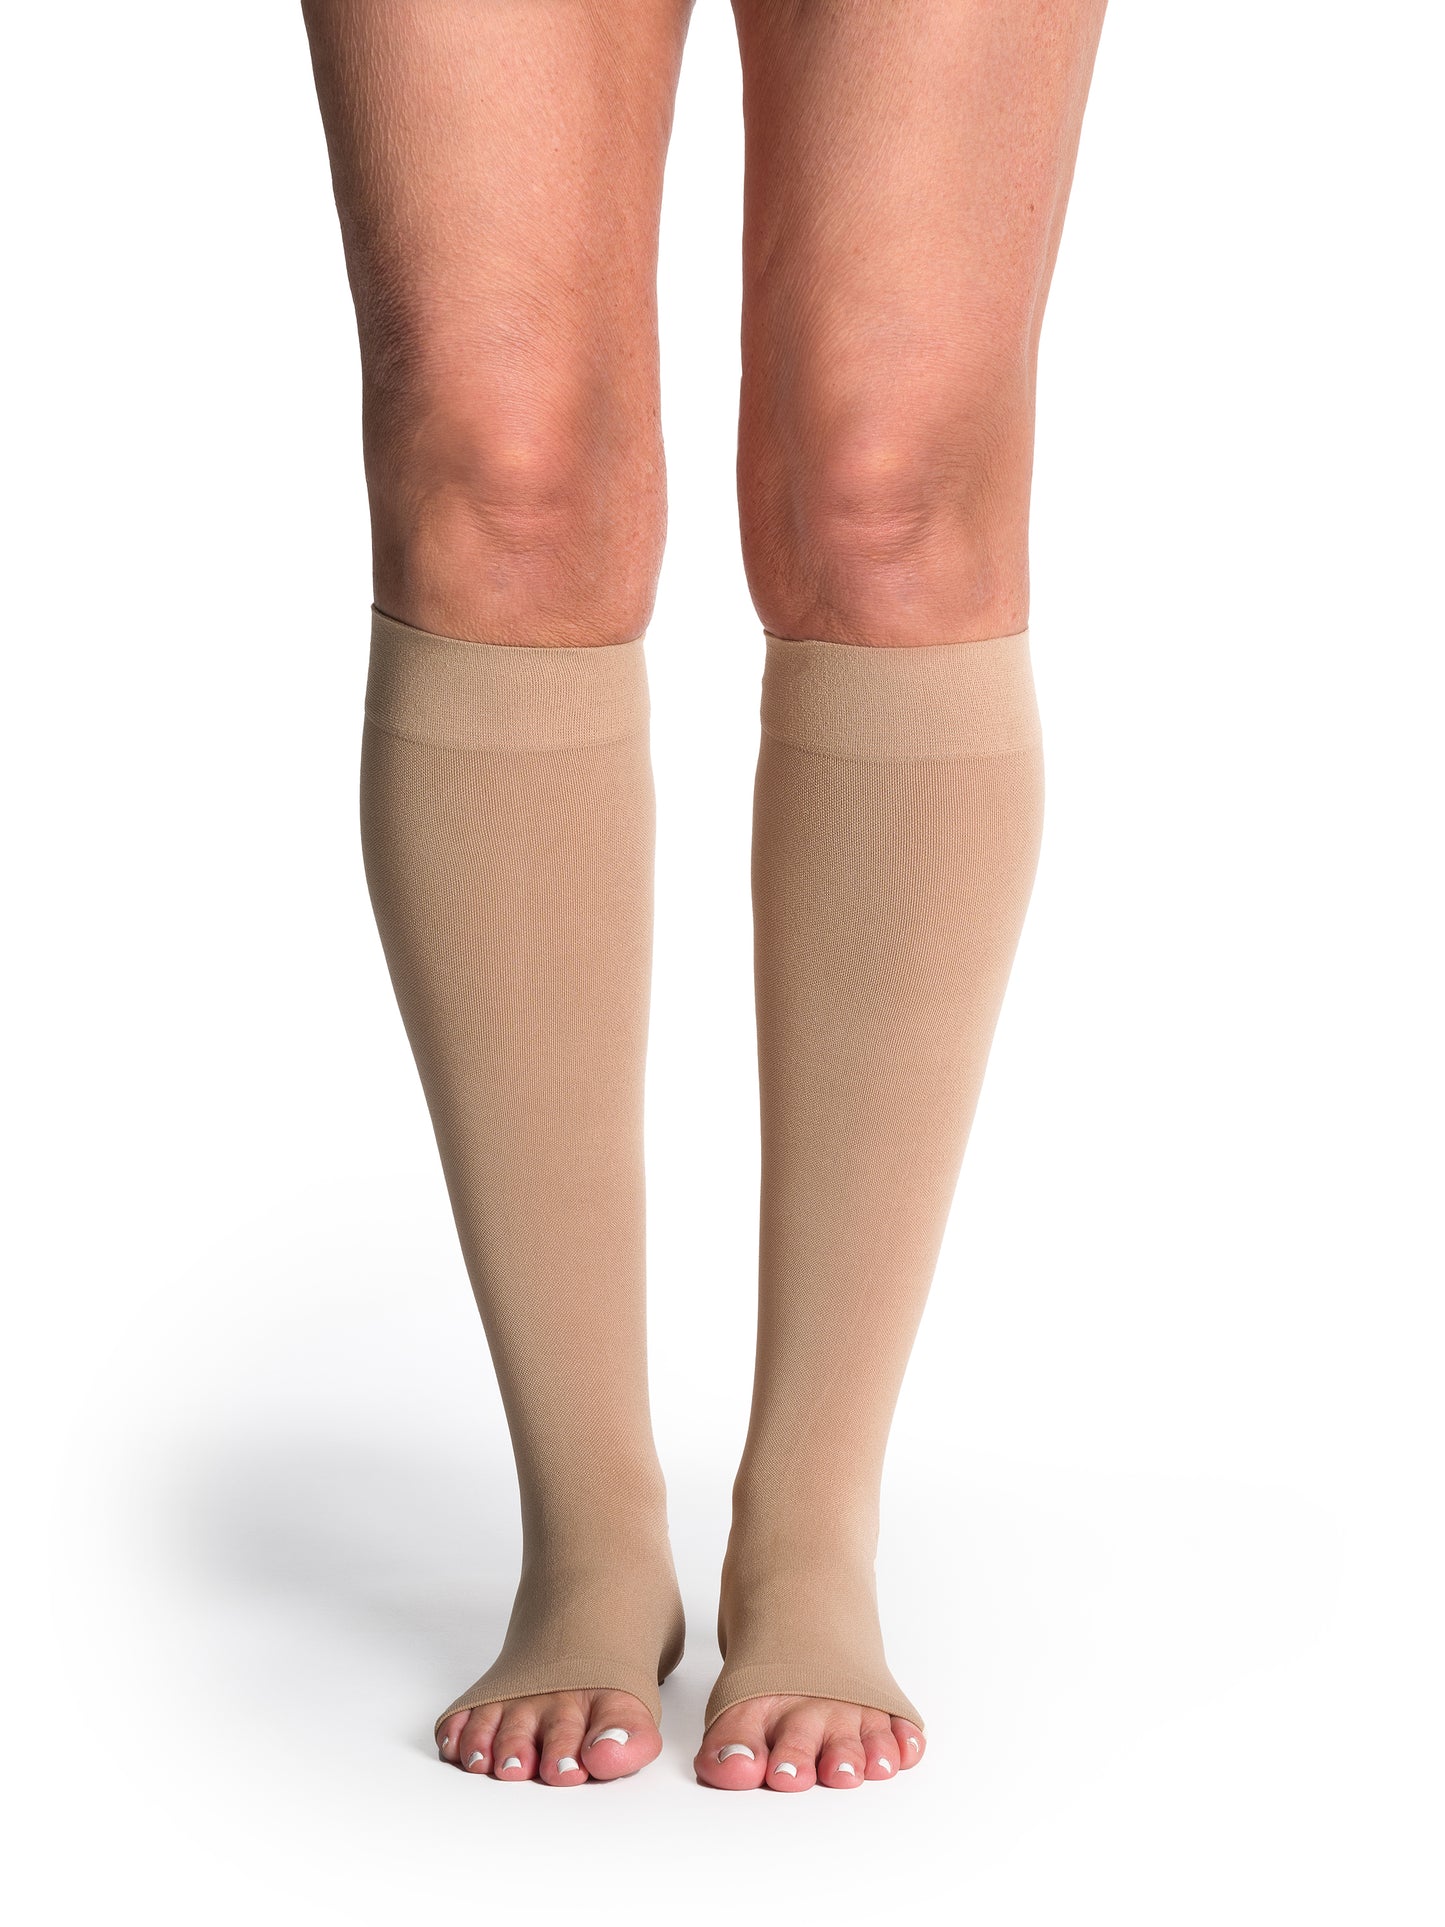 Sigvaris Style Soft Opaque Calf Knee-High in Color Chai 15-20mmHg